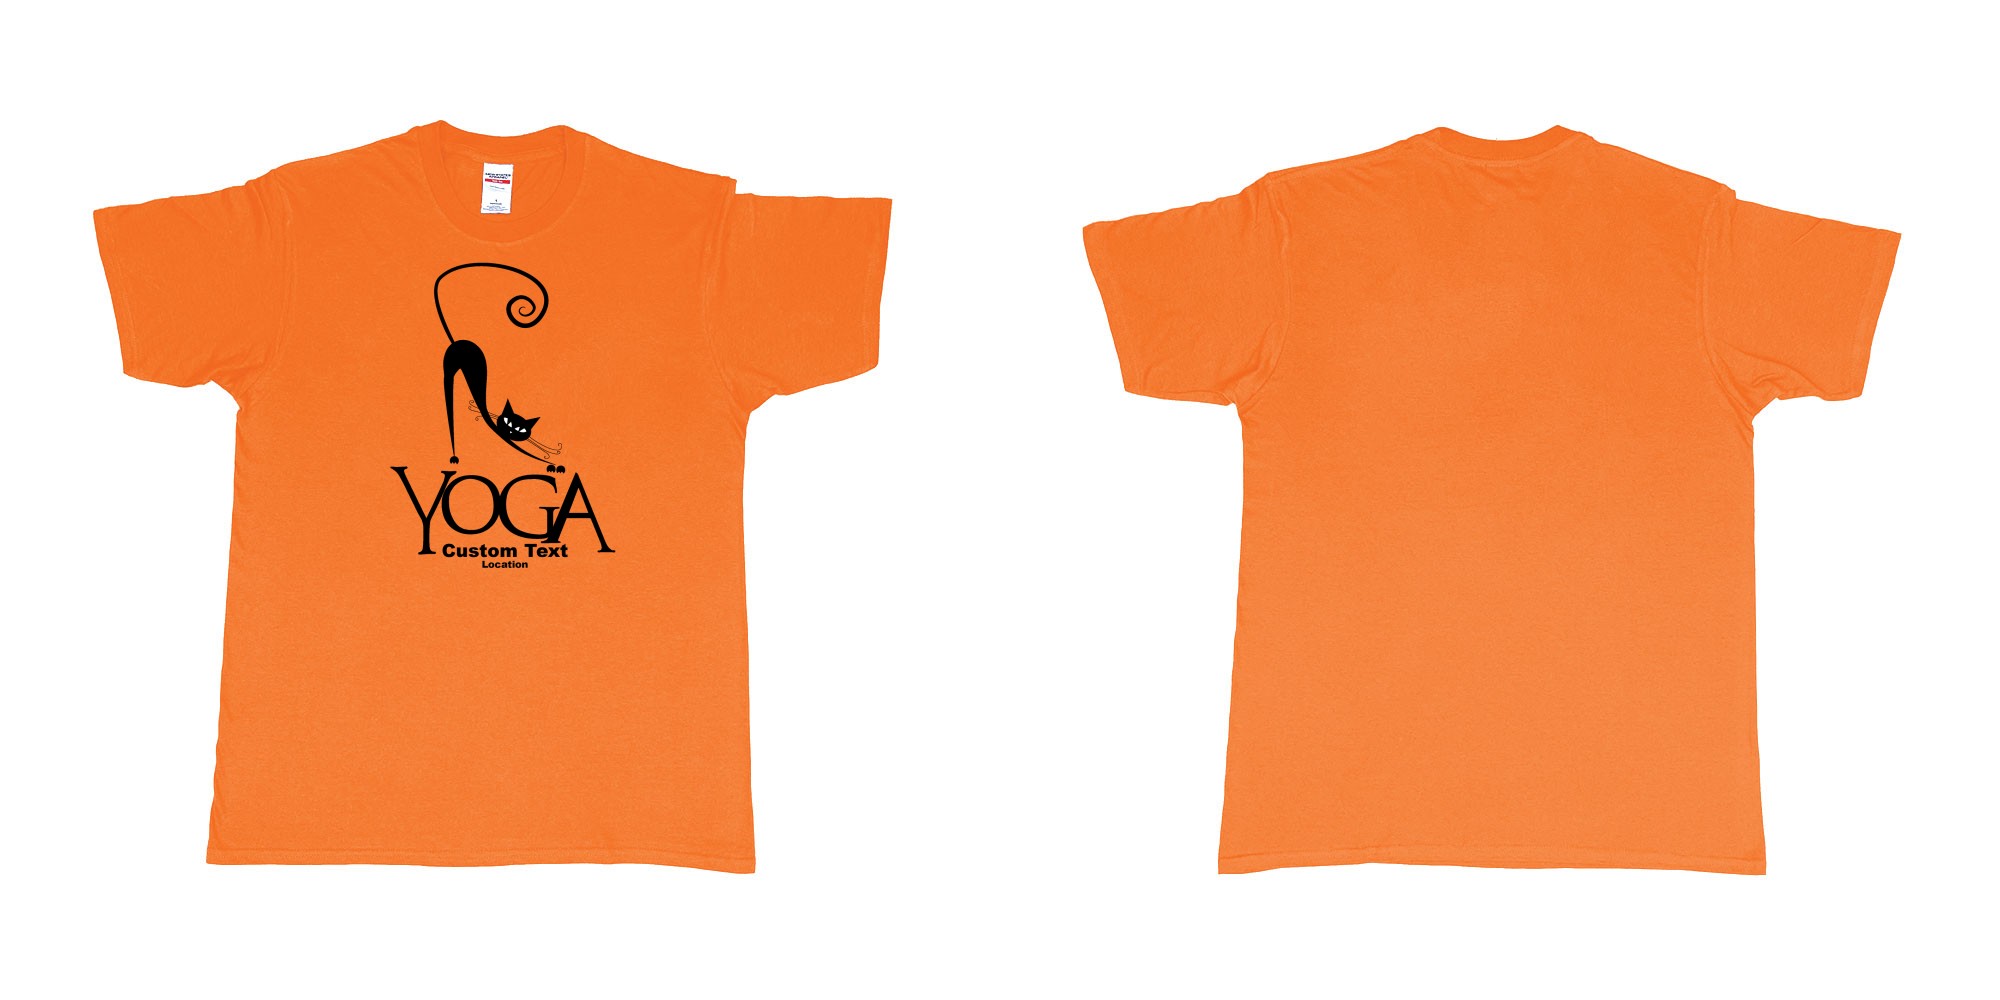 Custom tshirt design cat yoga custom text location print in fabric color orange choice your own text made in Bali by The Pirate Way